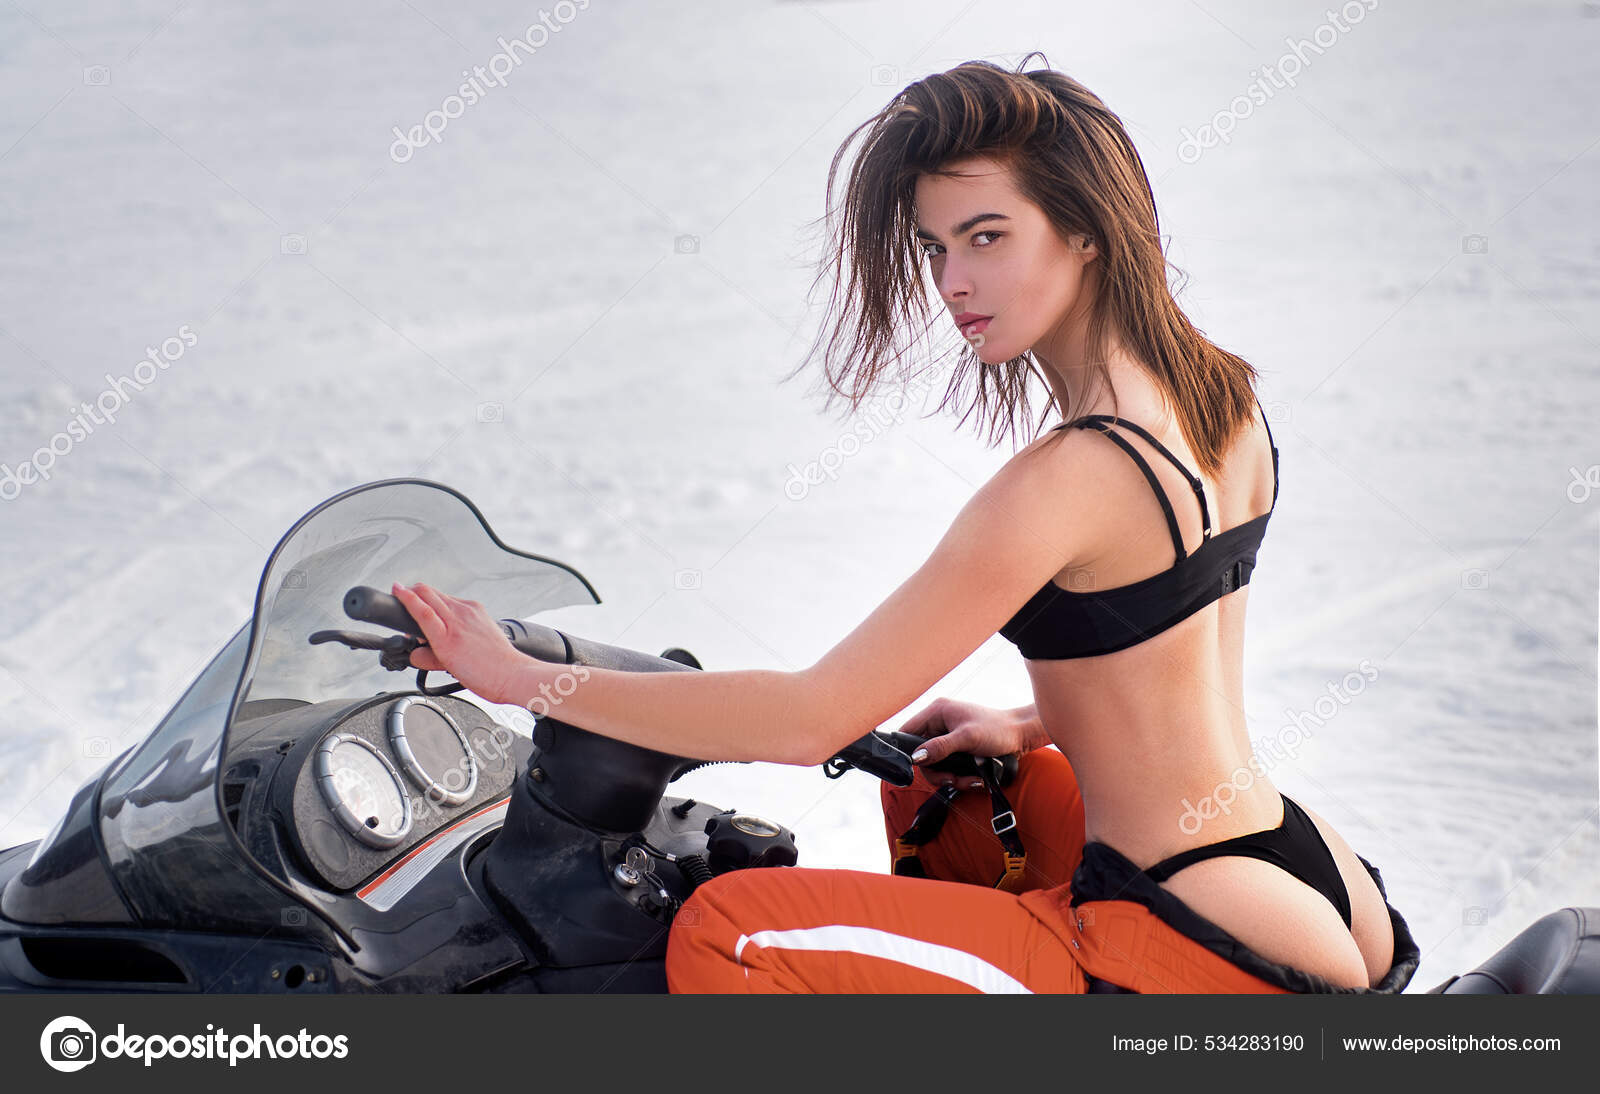 Sexy woman driving snowmobile in snowy winter image